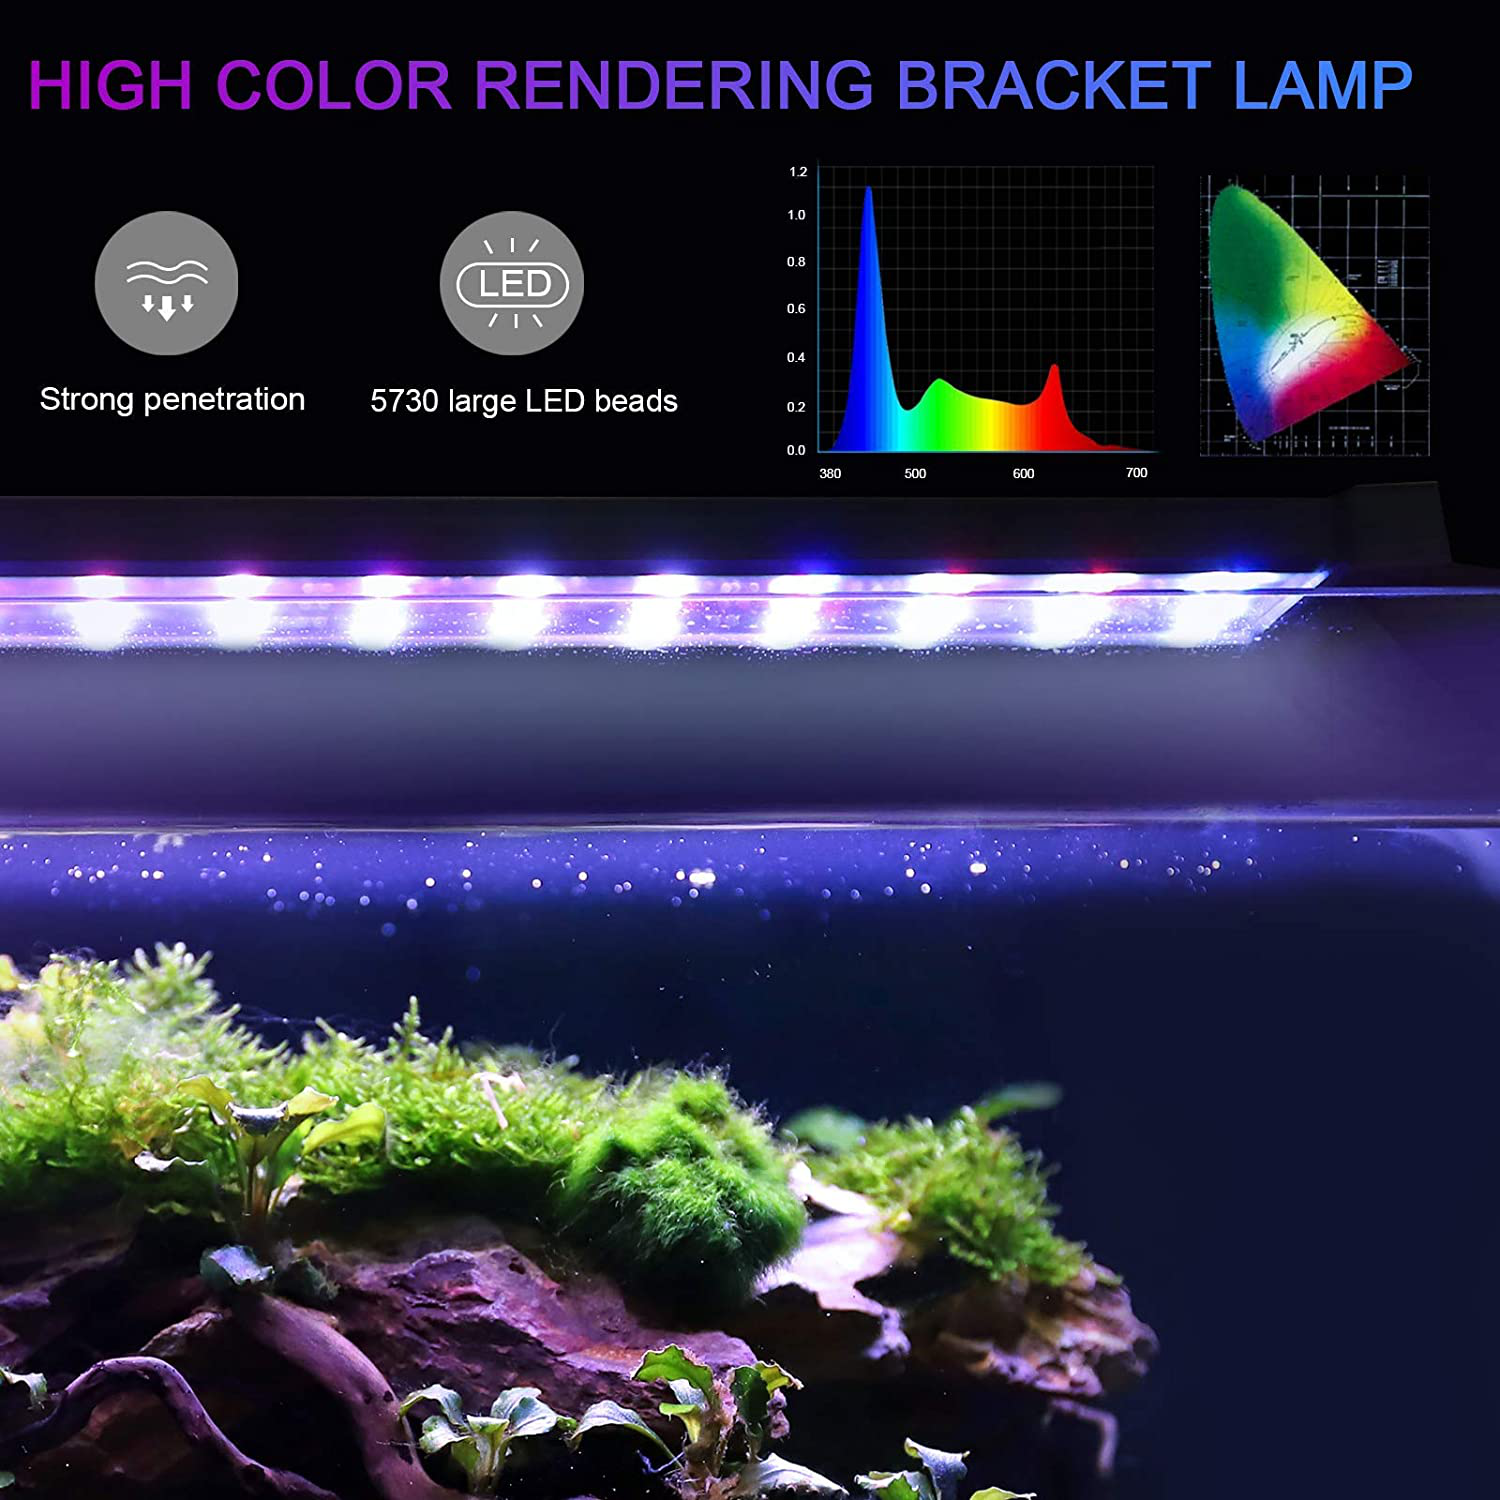 AQQA 11W-45W Aquarium LED Lights, Waterproof Full Spectrum Fish Tank Light with Timer Controller, White & Blue &Red Light, Extendable Brackets, for Freshwater Planted Tank